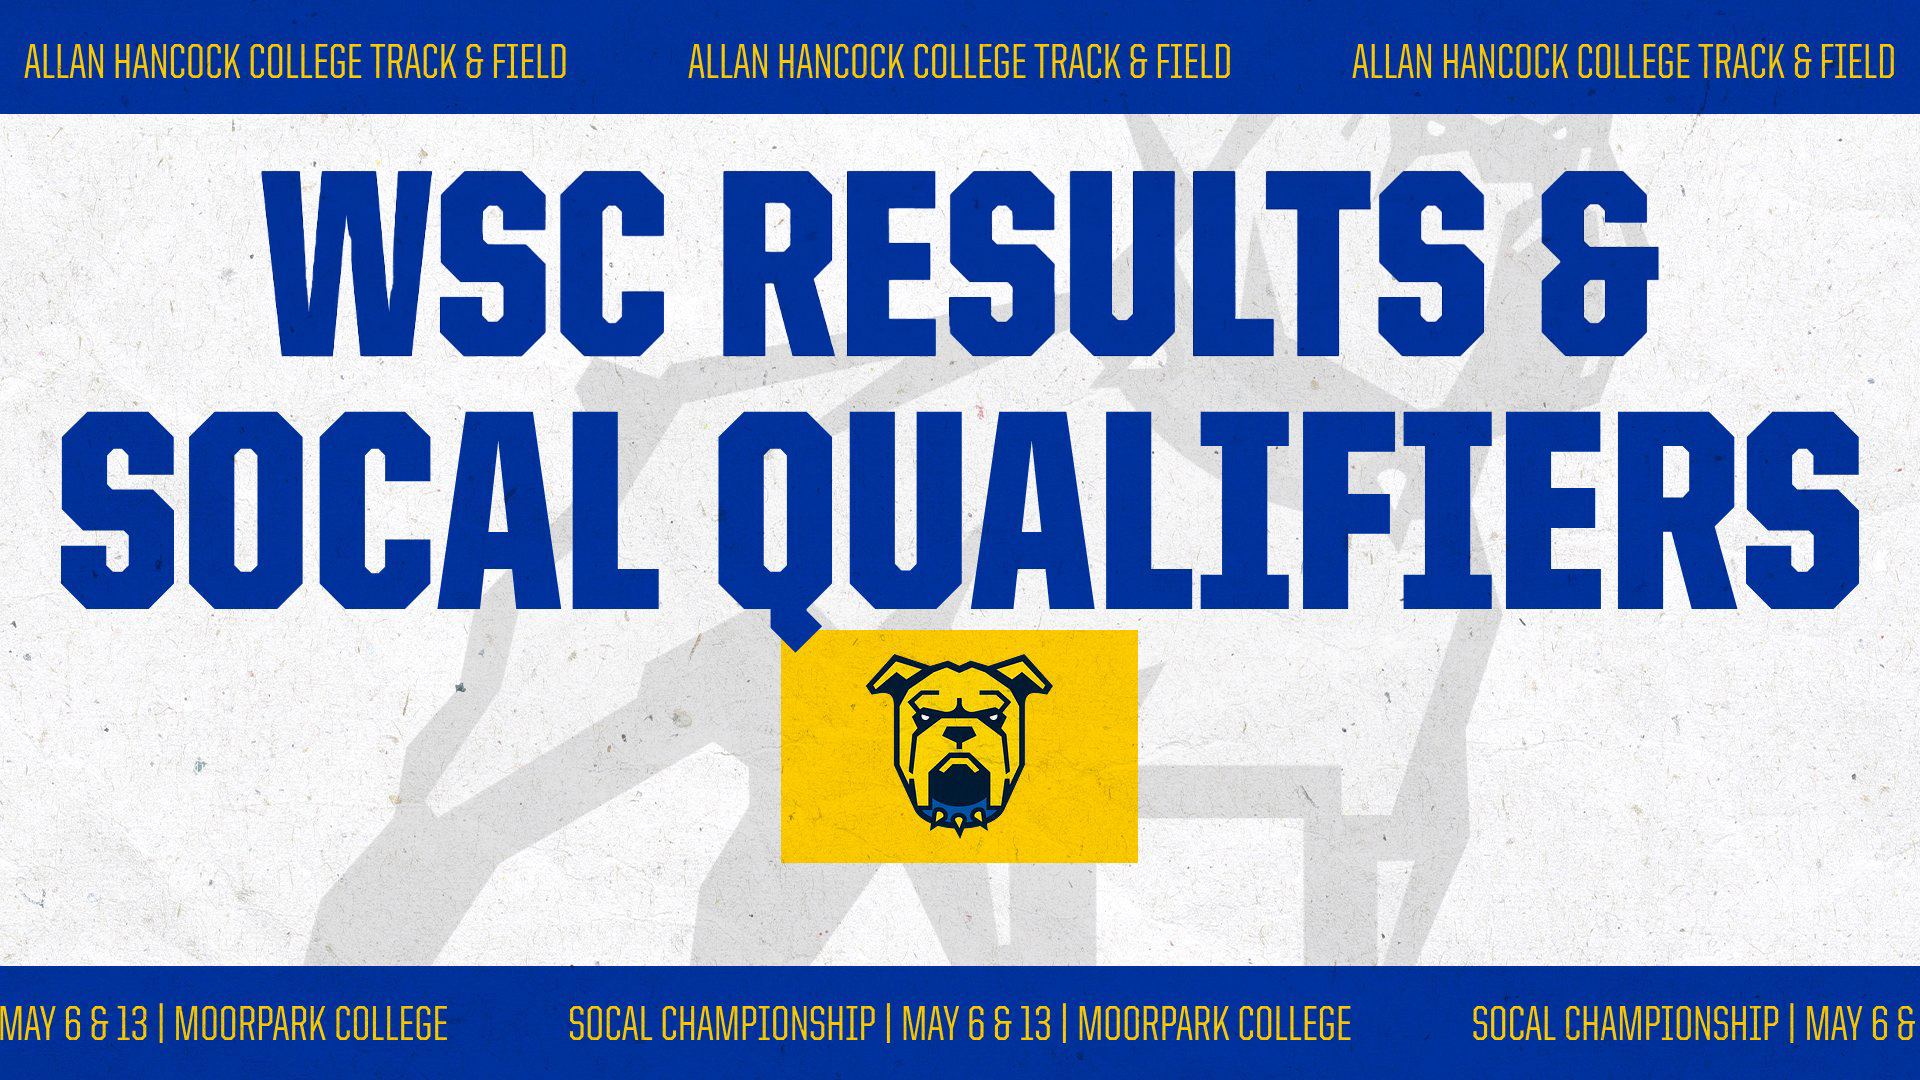 Track & Field Wraps Up Conference Action at WSC Finals, SoCal Qualifiers Announced